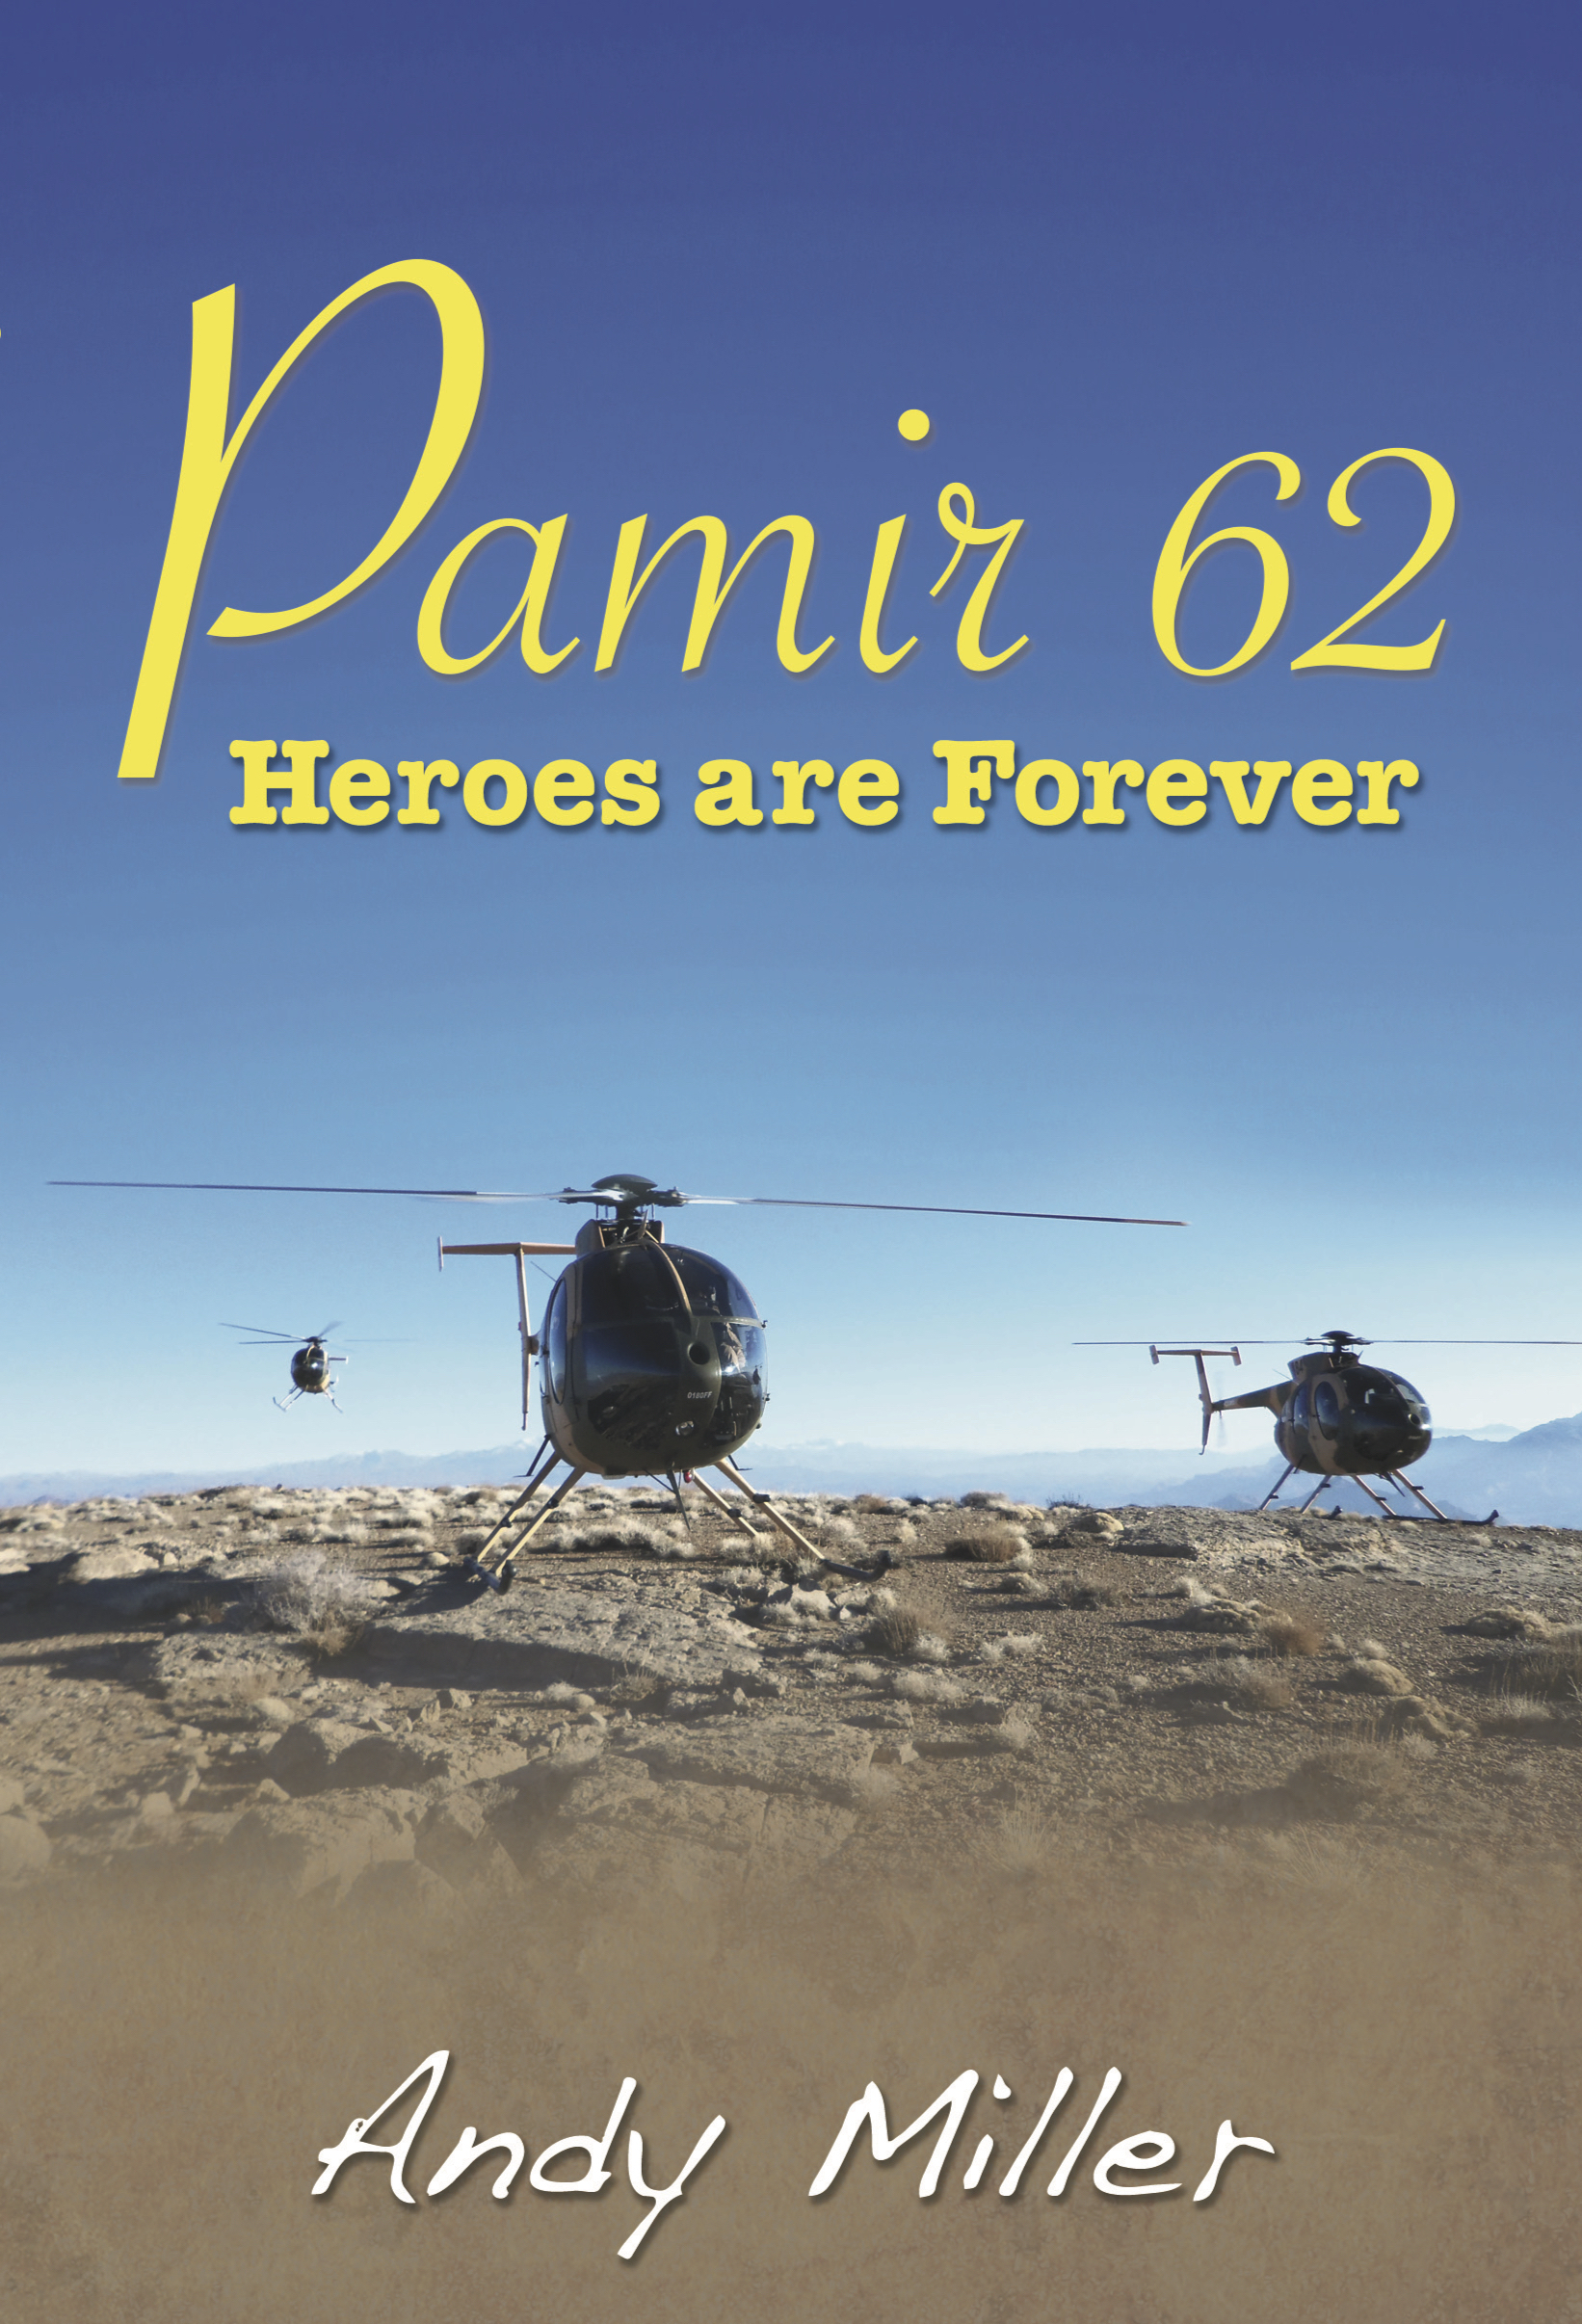 Book cover shows photograph of 3 helicopters against background of sandy soil and blue sky. Text reads Pamir 62 Heroes are Forever by Andy Miller